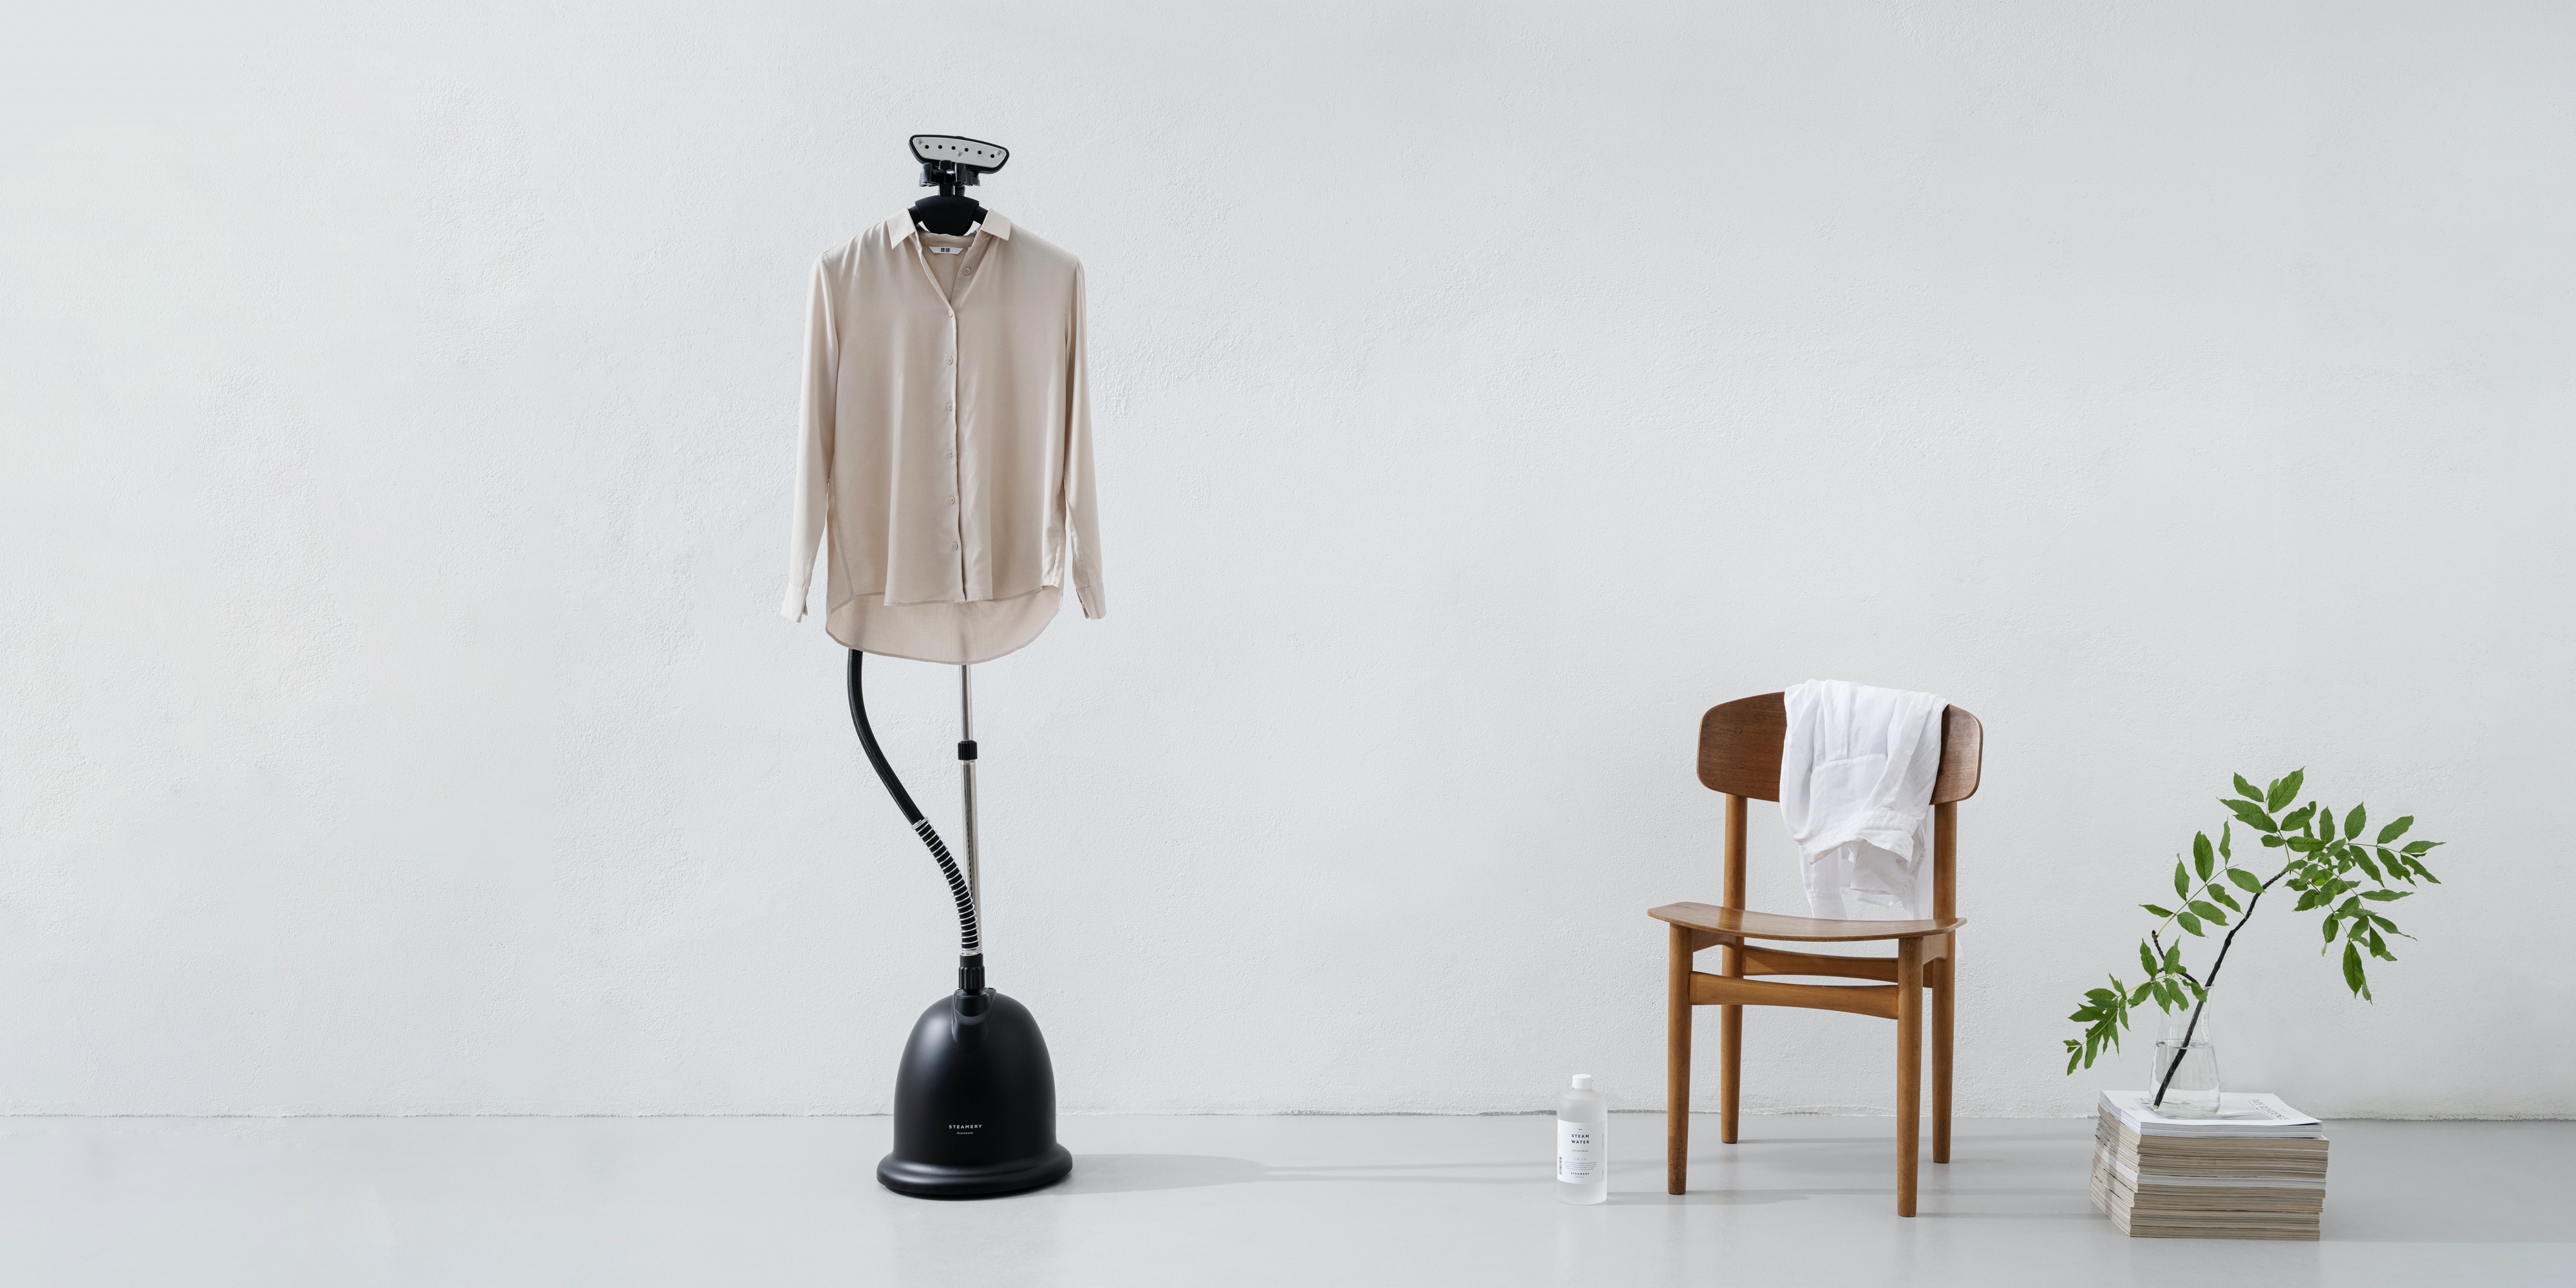 Steamery Stockholm Review: Take Care of Your Clothes